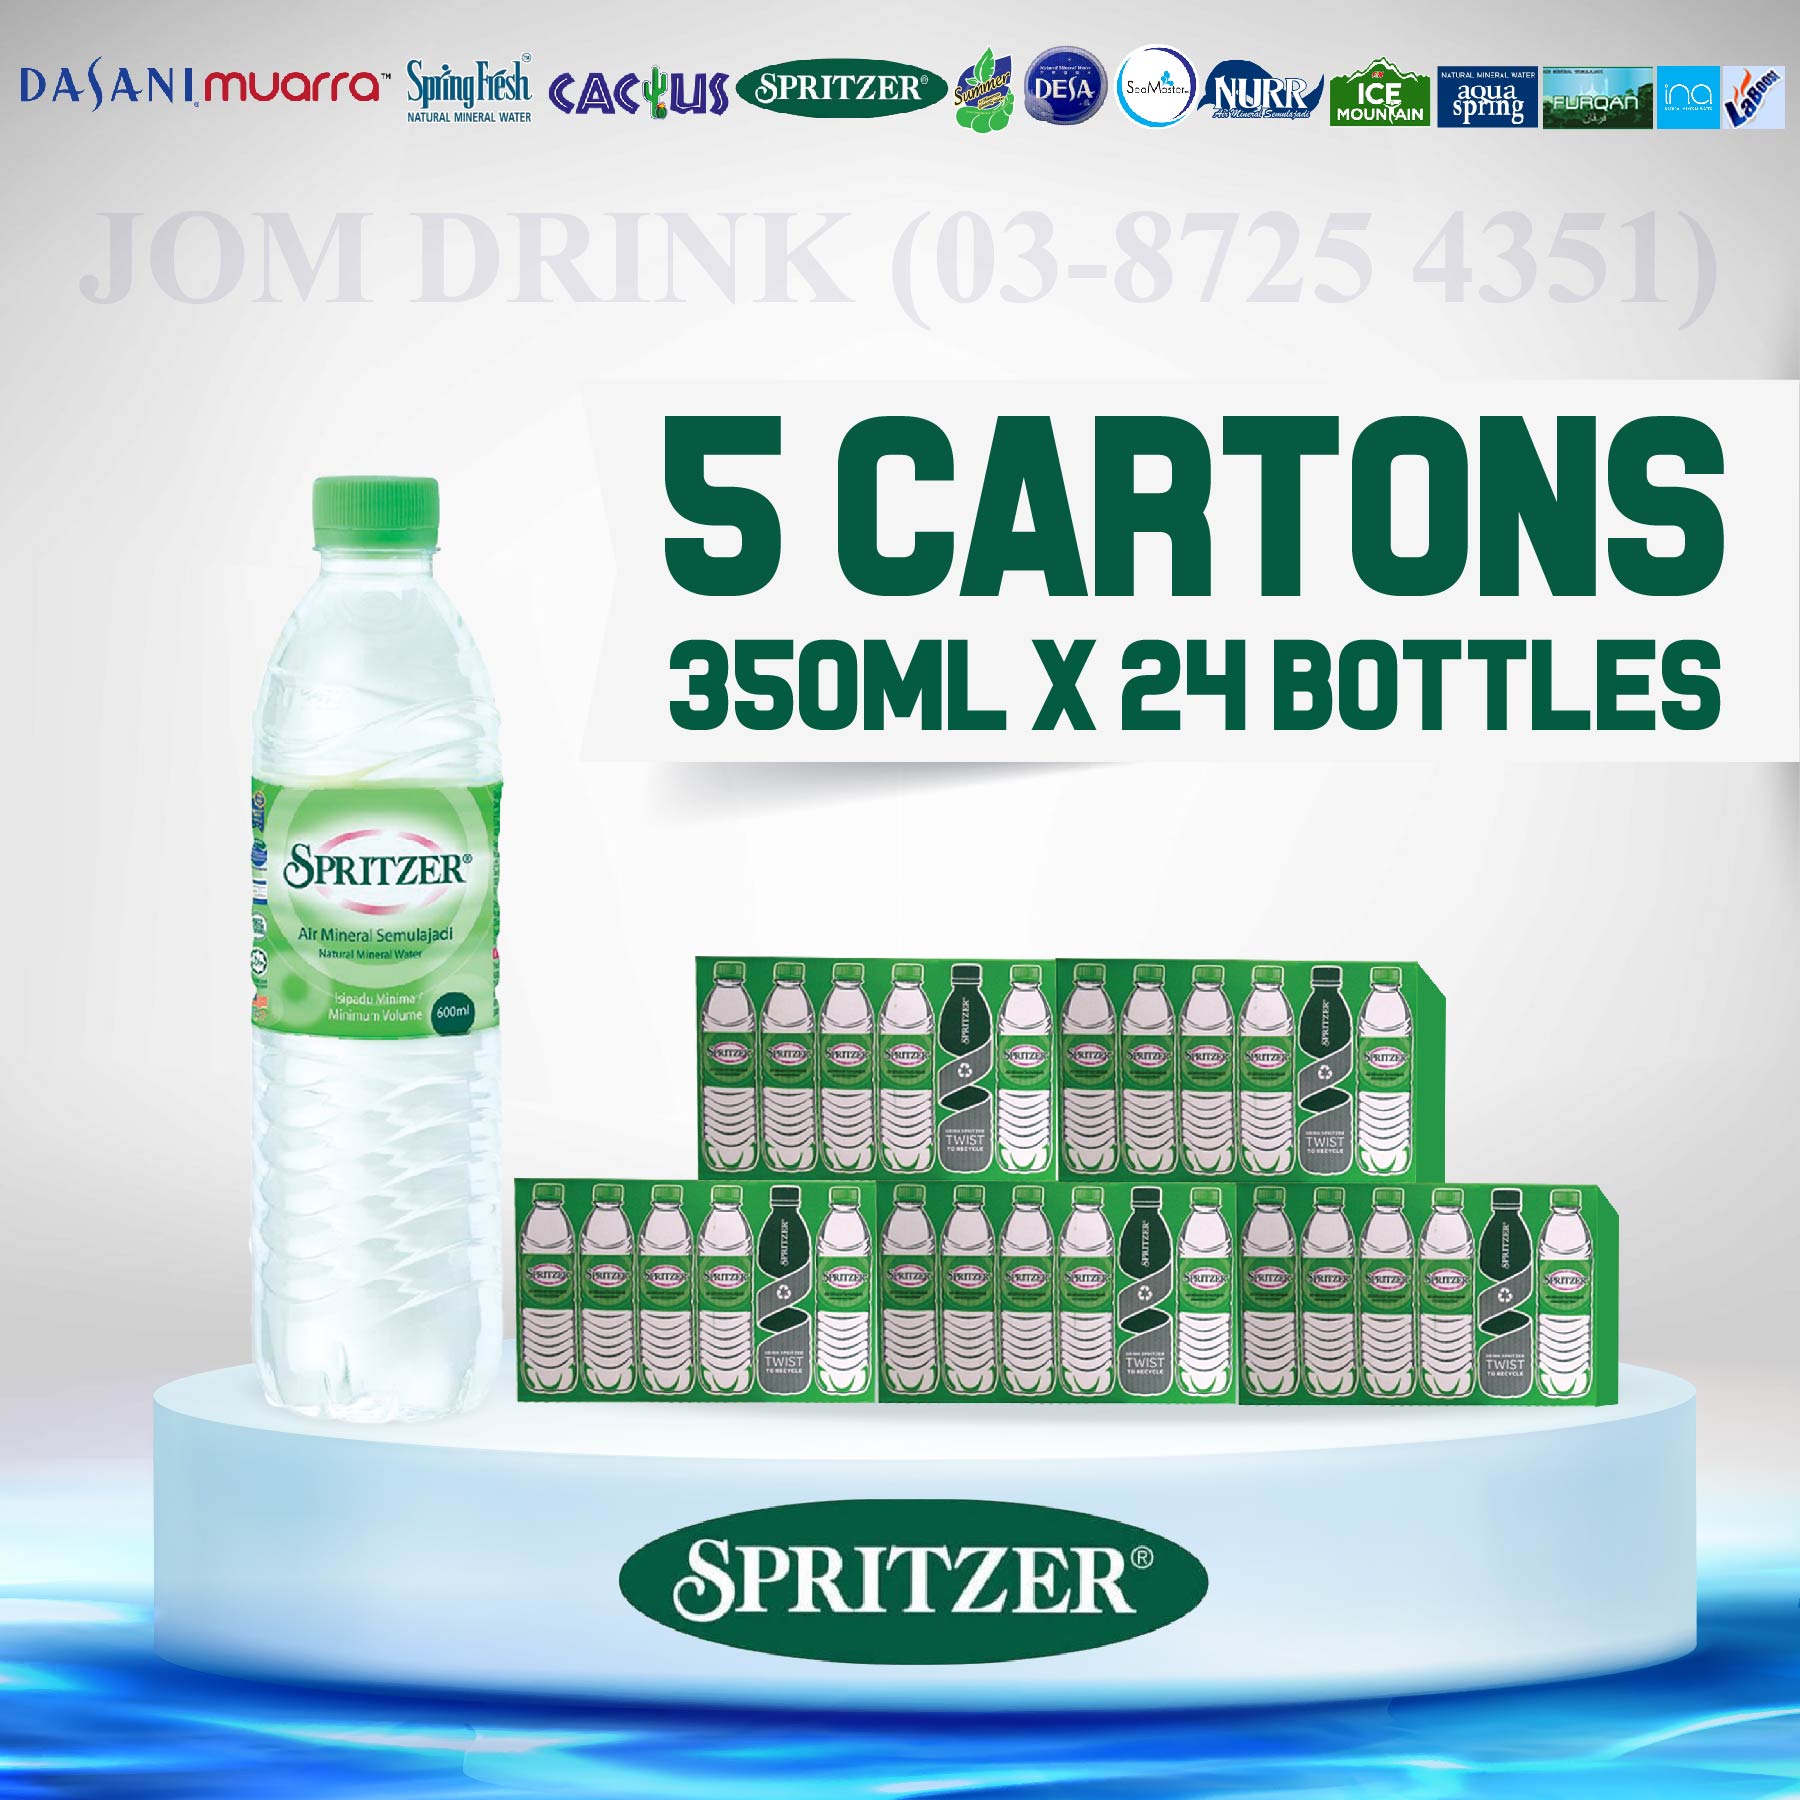 PACKAGES OF 5 BOXES : SPRITZER MINERAL WATER 600ML